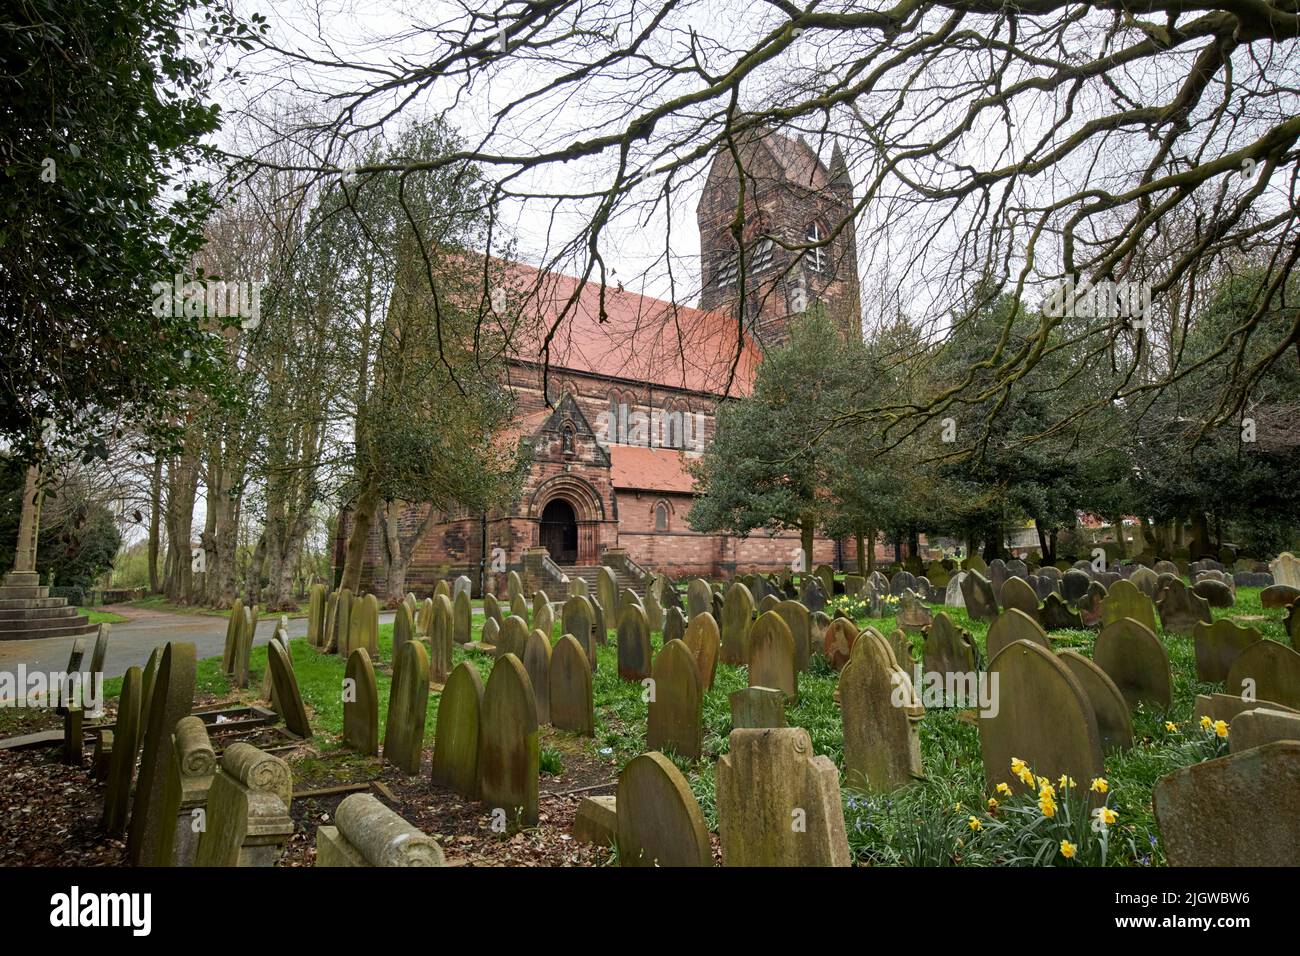 St Chads church and graveyard Kirkby Merseyside England uk St Chads is on a site recorded in the domesday book. Stock Photo